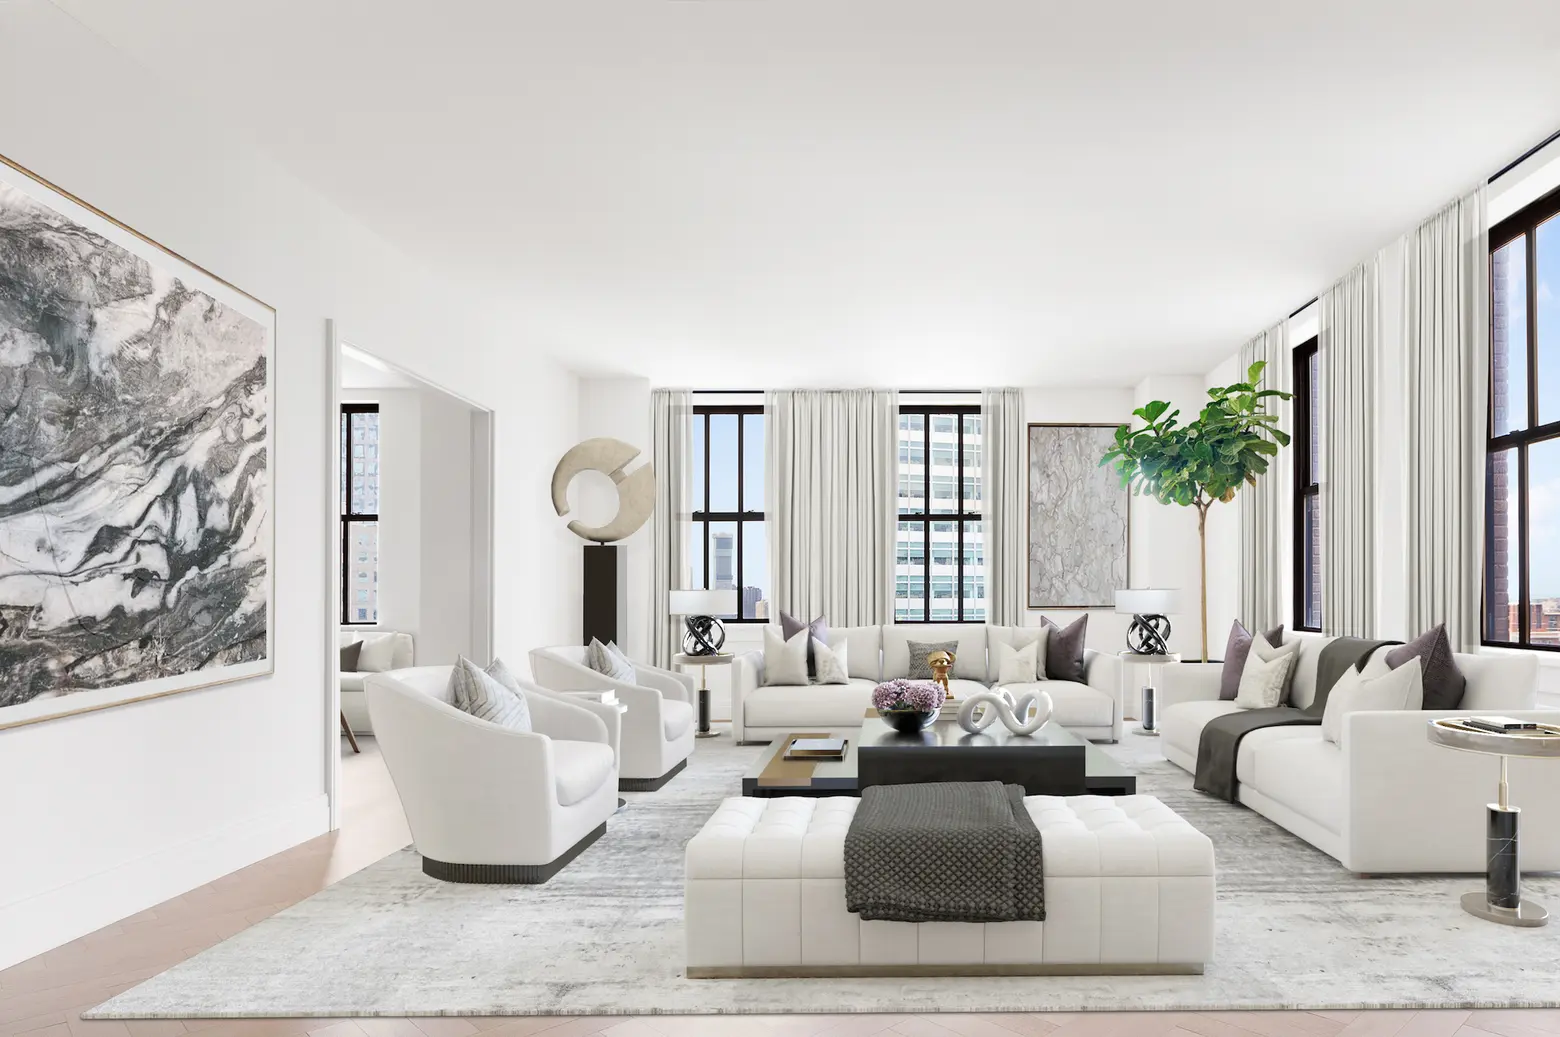 This grand four-bedroom Tribeca condo in the world’s first Art Deco skyscraper asks $8.8M